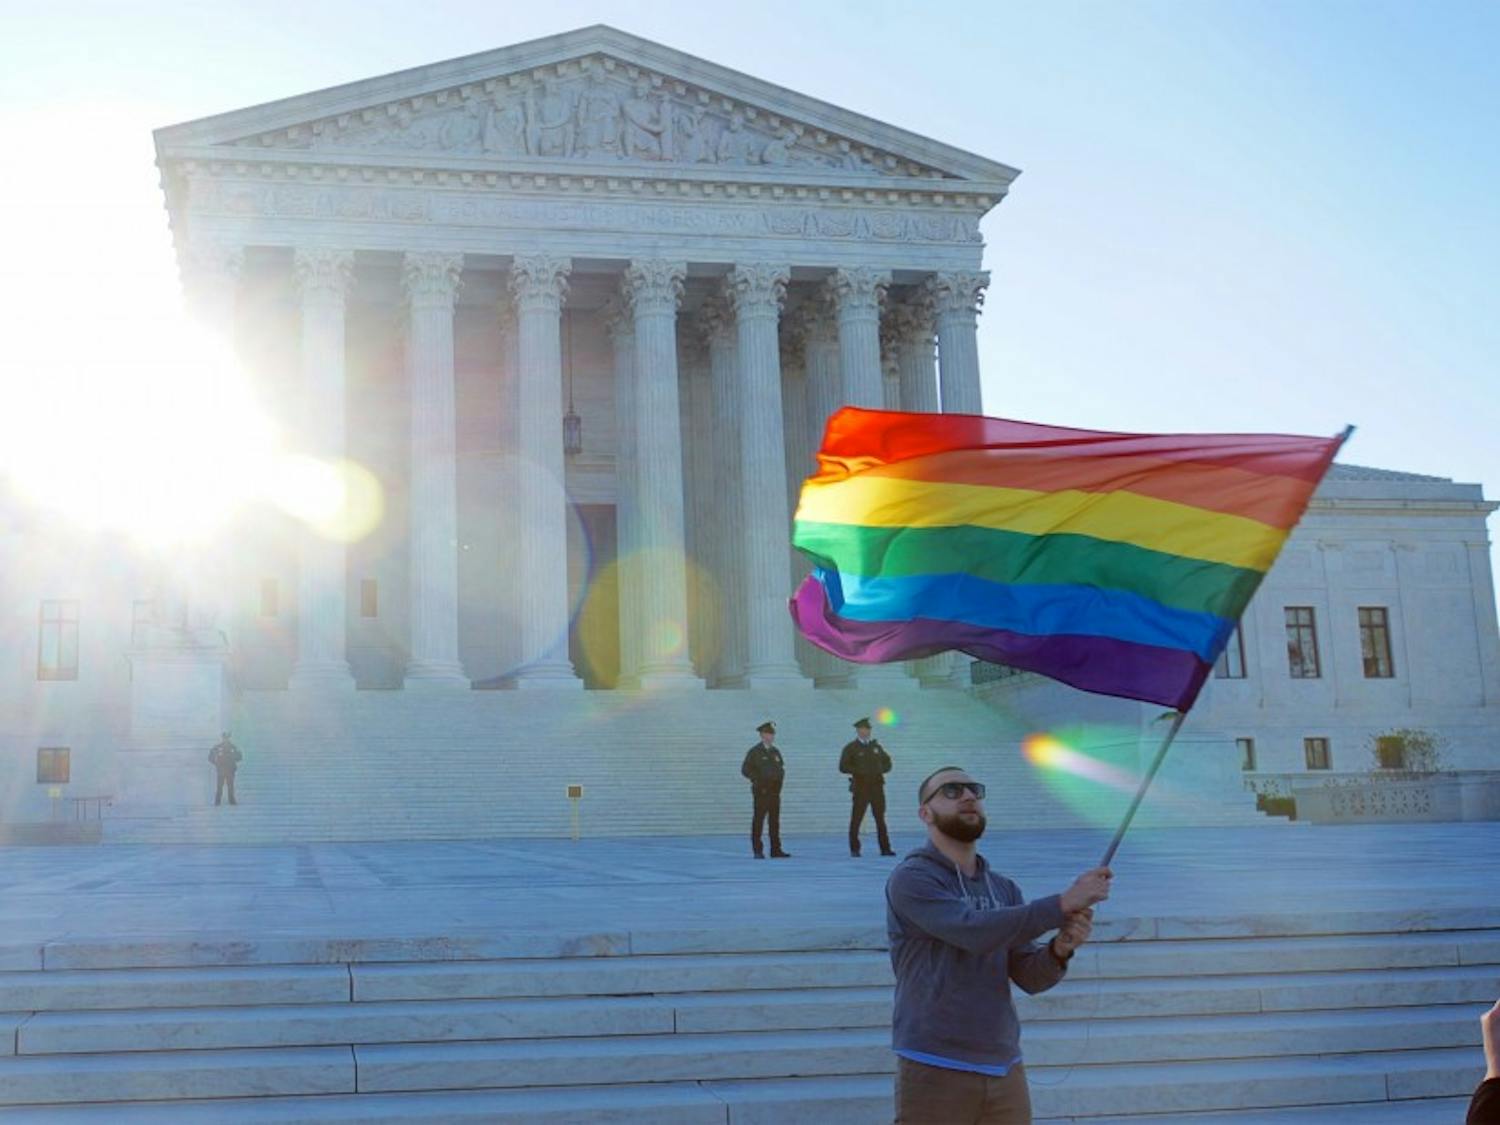 Arguments at the United States Supreme Court for Same-Sex Marriage on April 28, 2015